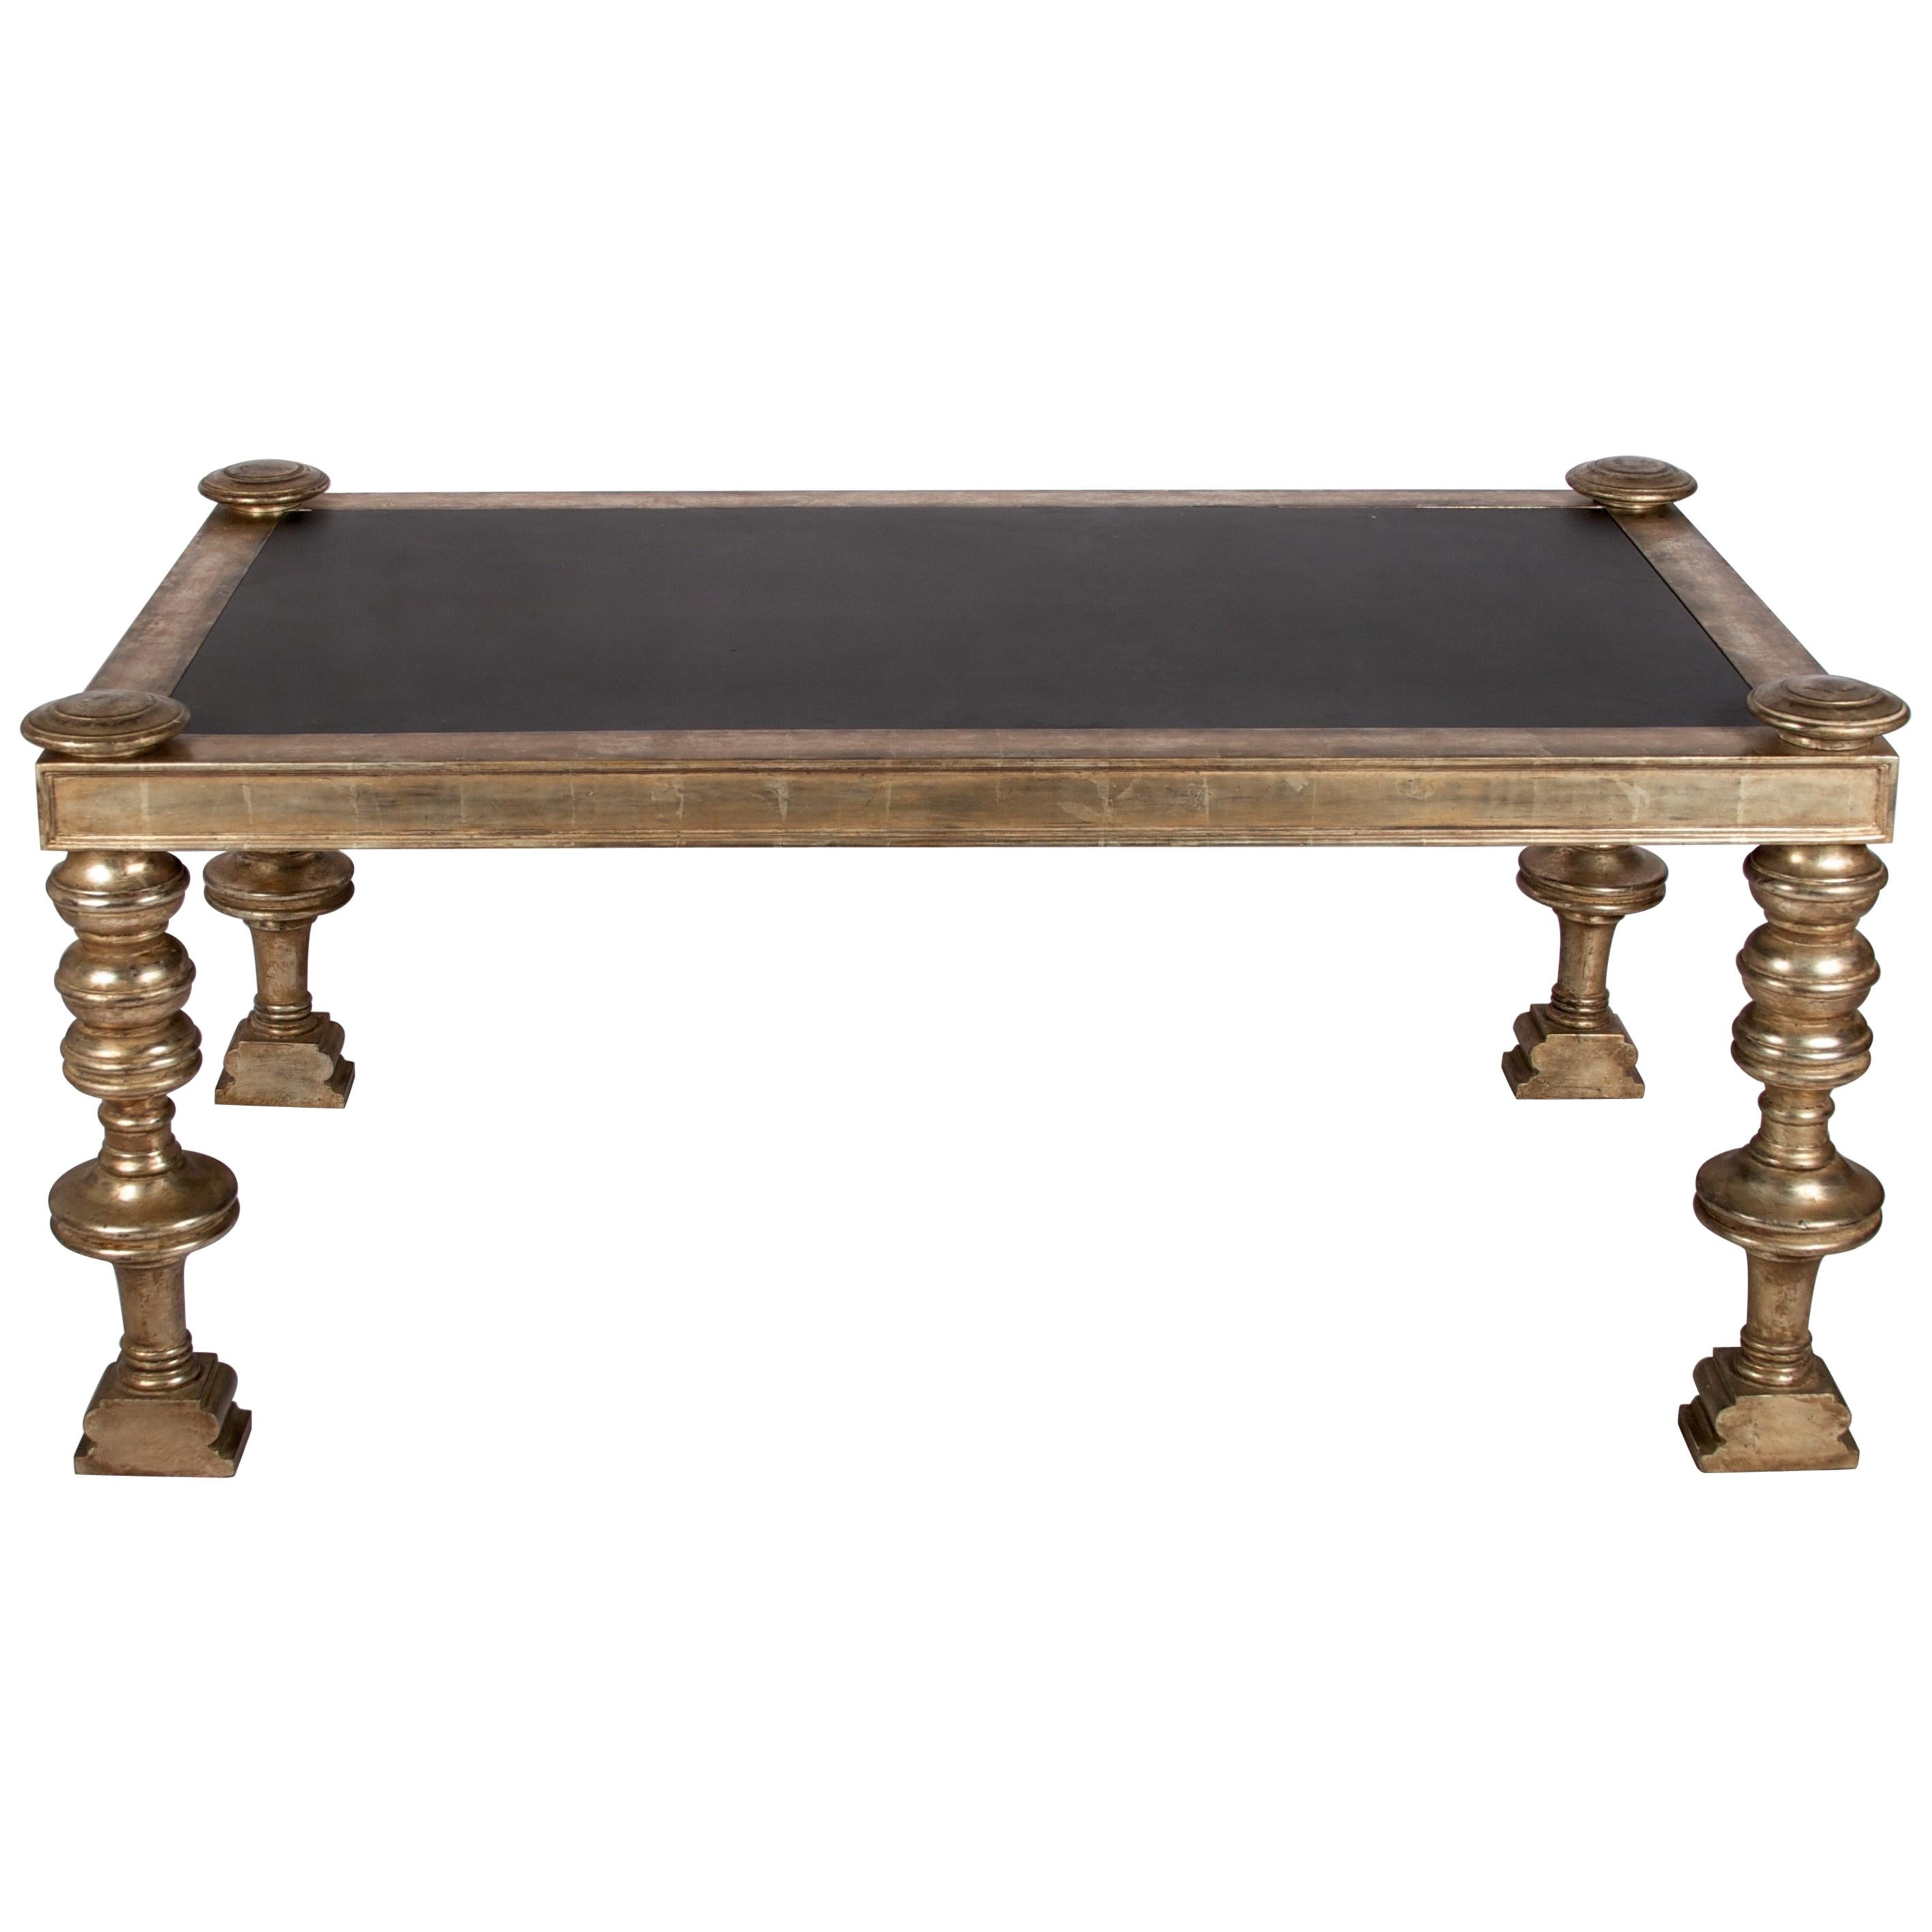 Eclectic Coffee Table with Inset Slate Top, White Gold Frame, fabr. by Quatrain